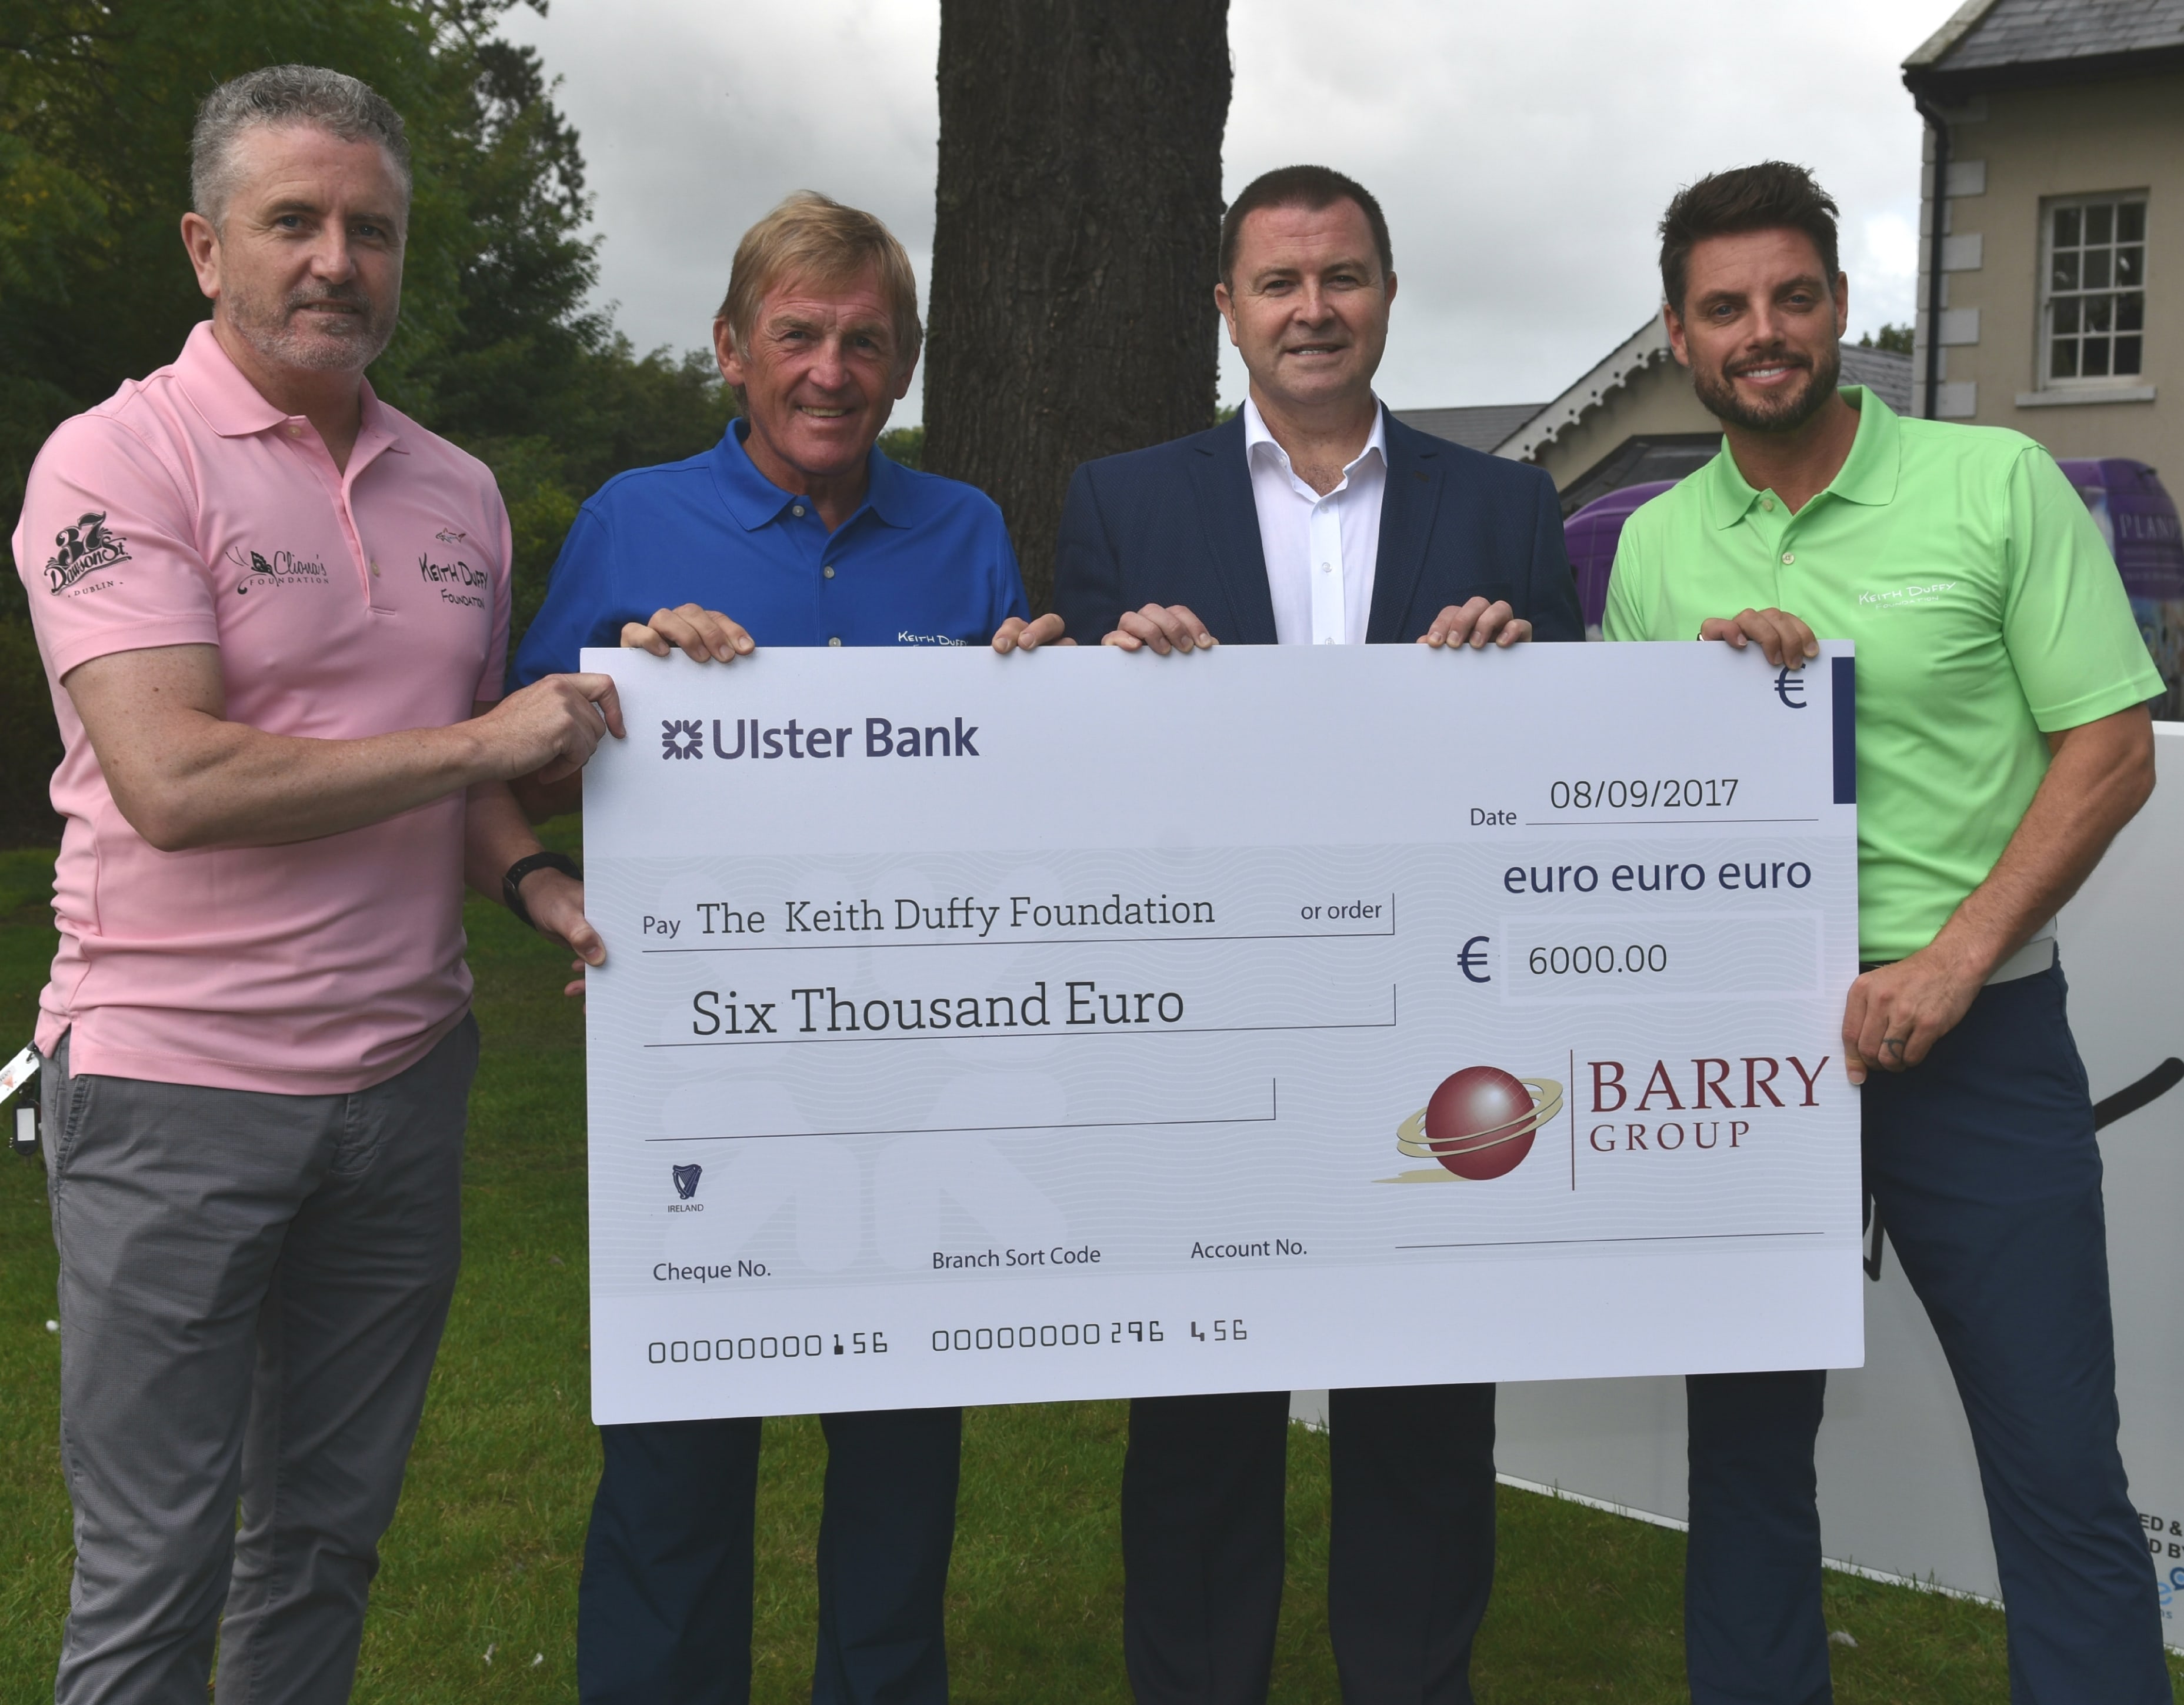 A Huge Thank You to the Barry Group